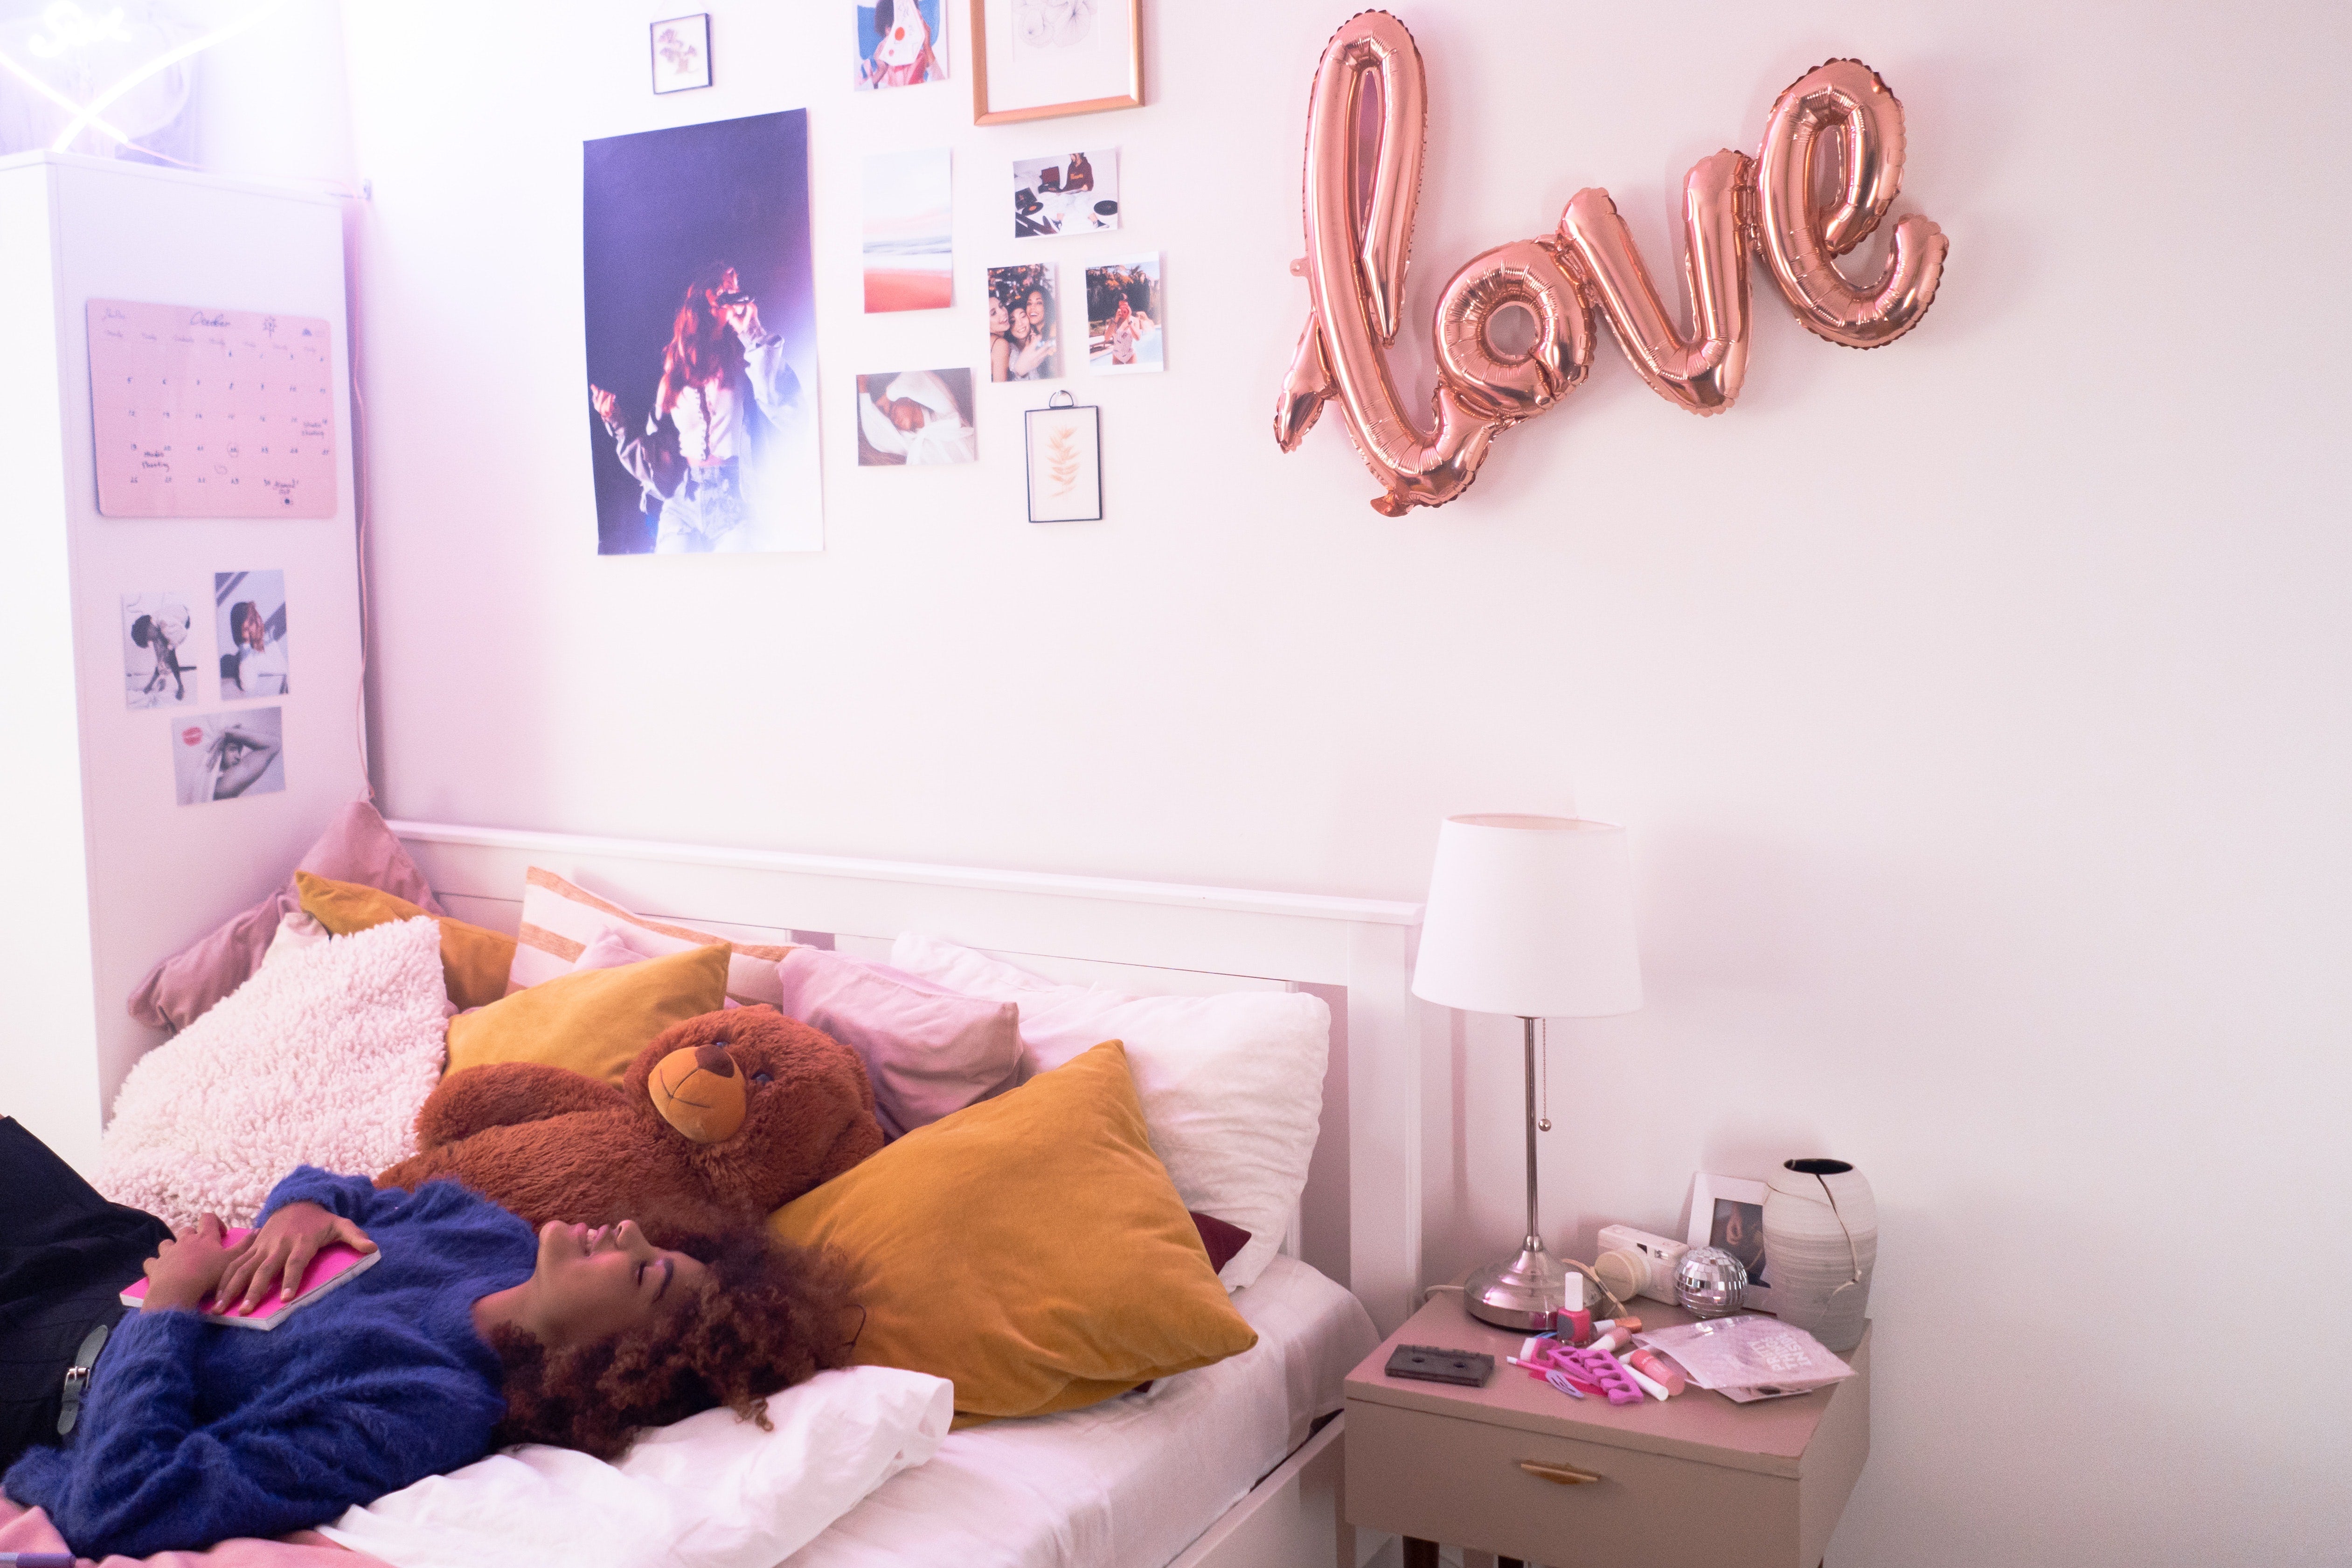 Teenage Designs: How to Decorate Your Bedroom Like a Teenager